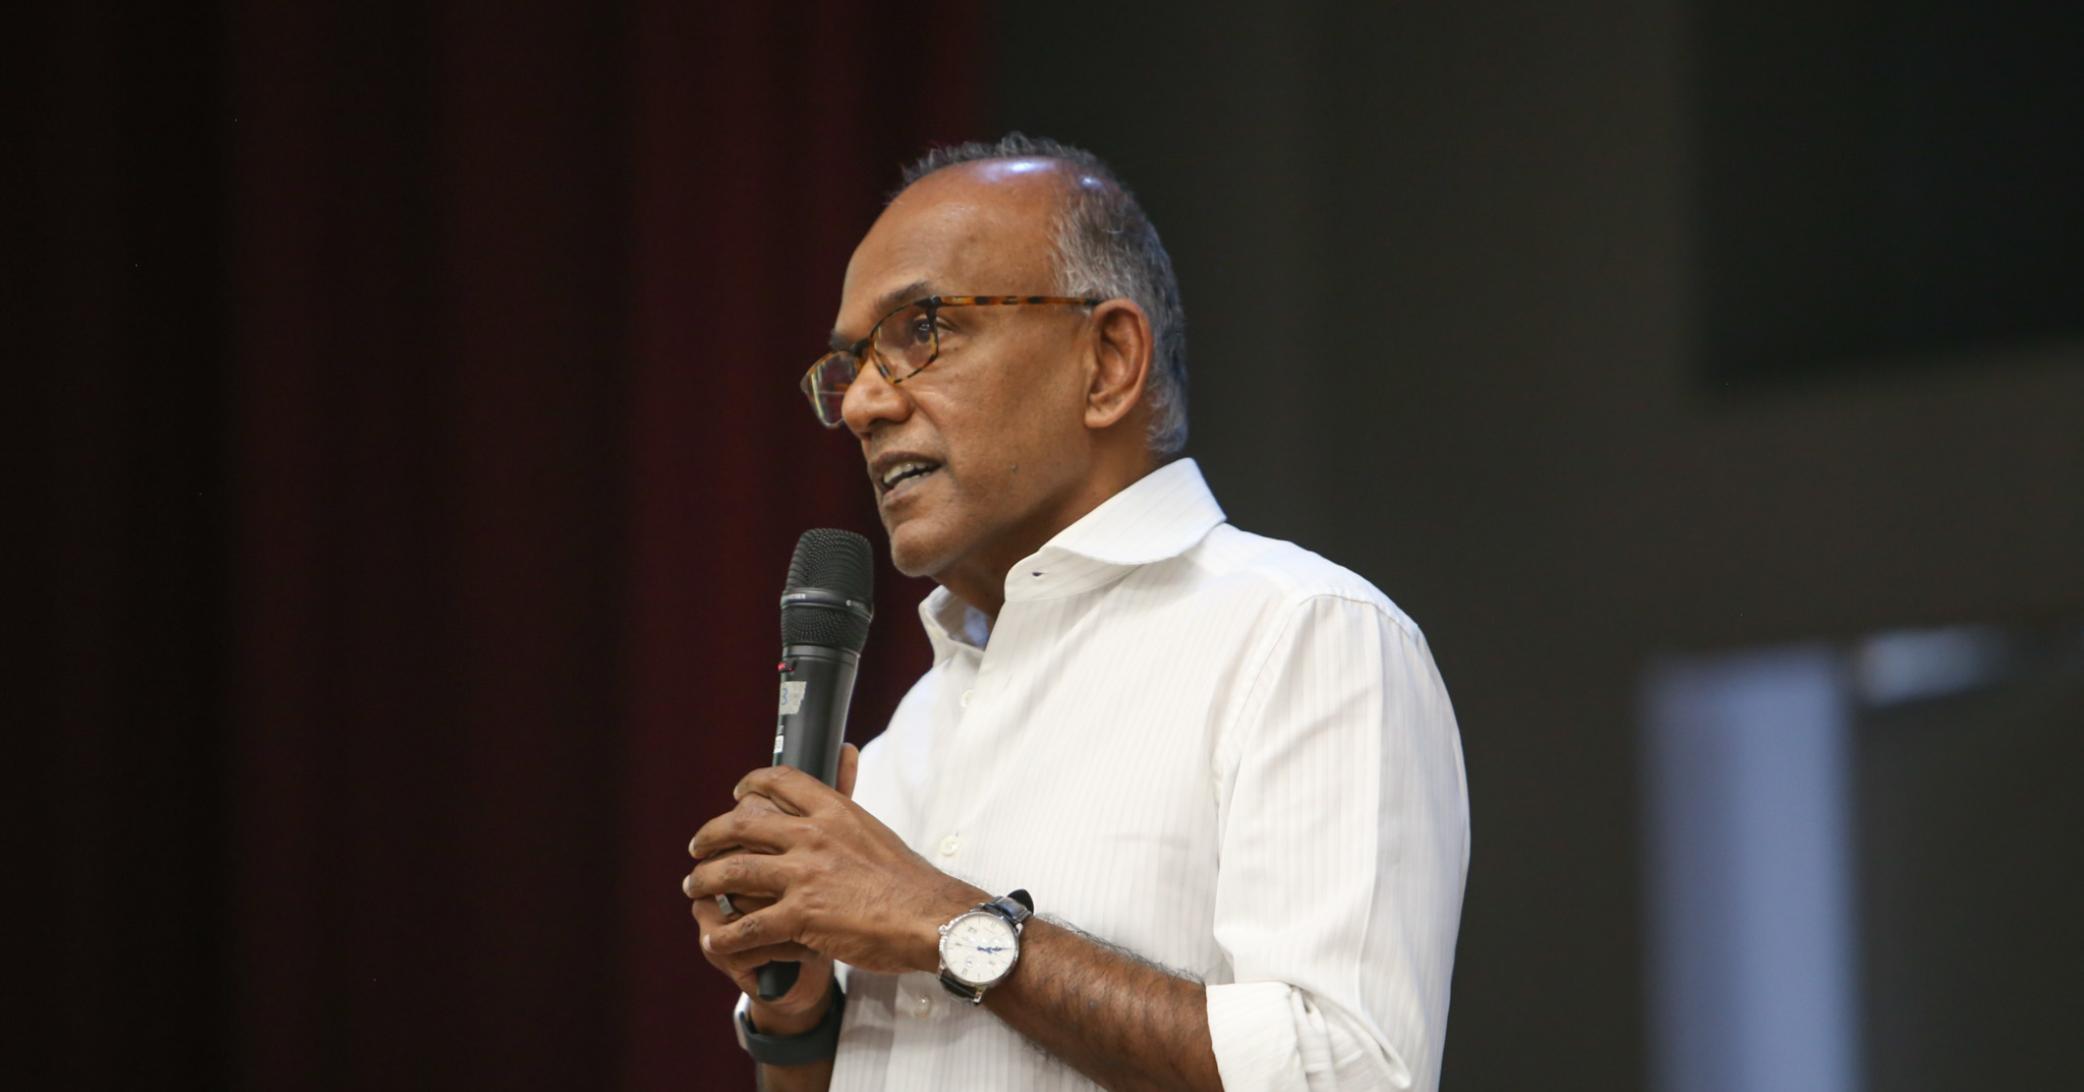 S'poreans must be careful to not let events in Middle East undermine S'porean peace & harmony: Shanmugam